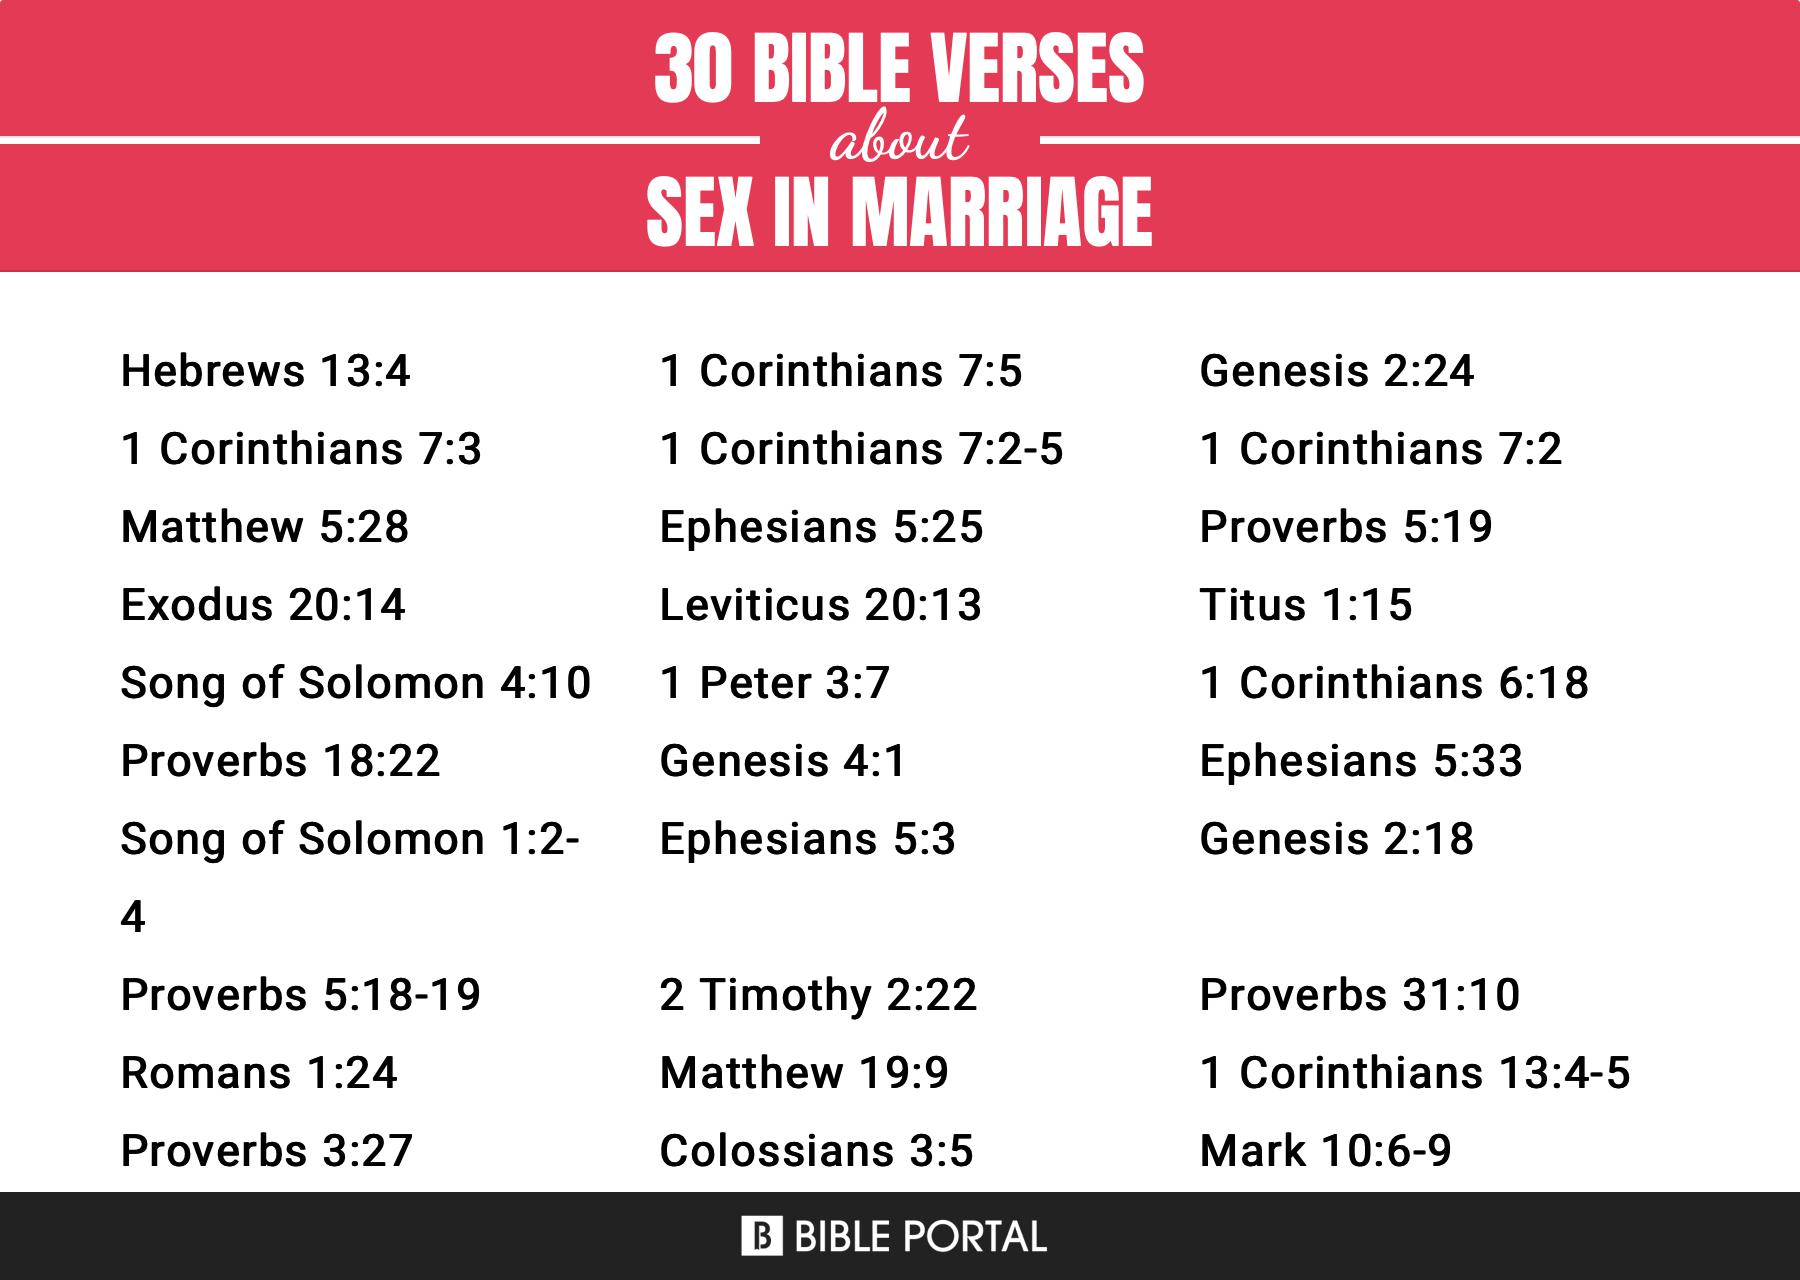 83 Bible Verses About Sex In Marriage